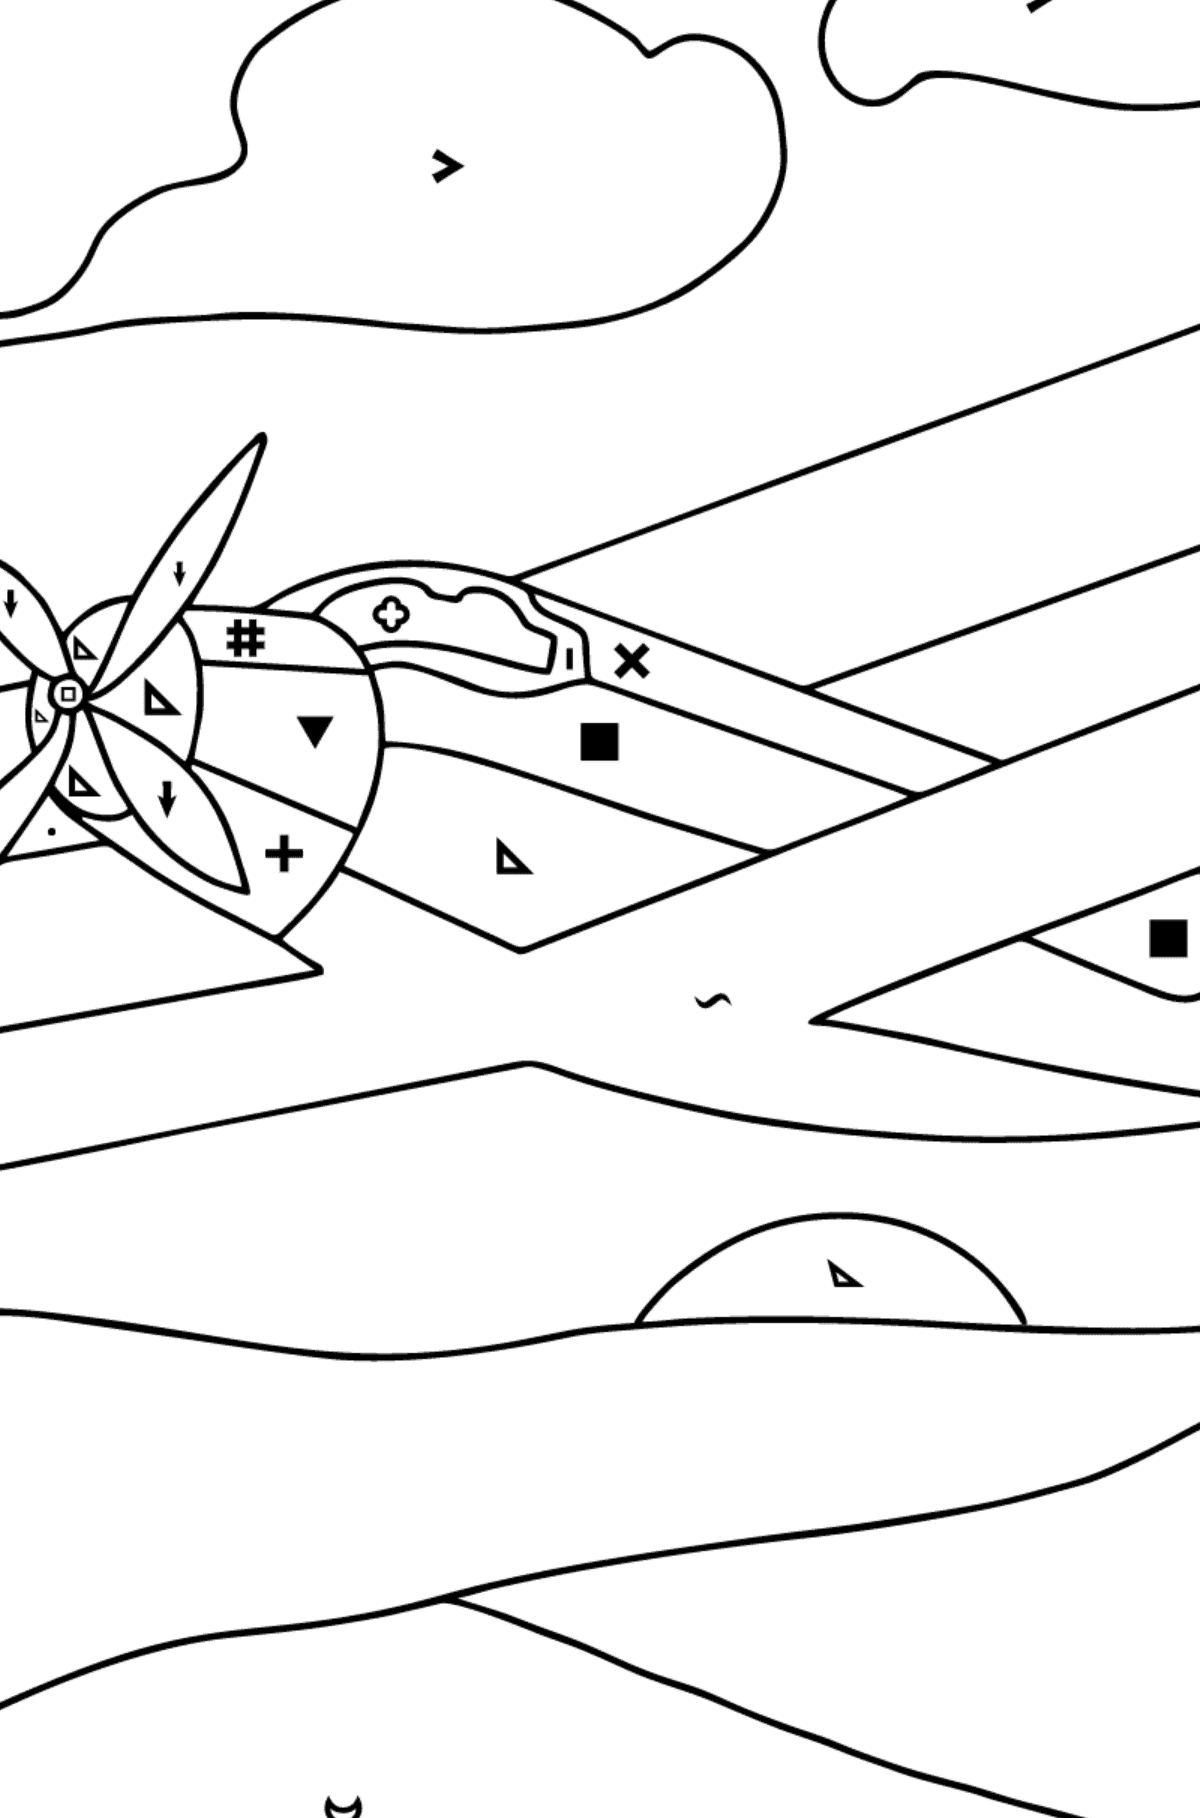 Coloring Page - A Biplane - Coloring by Symbols and Geometric Shapes for Children